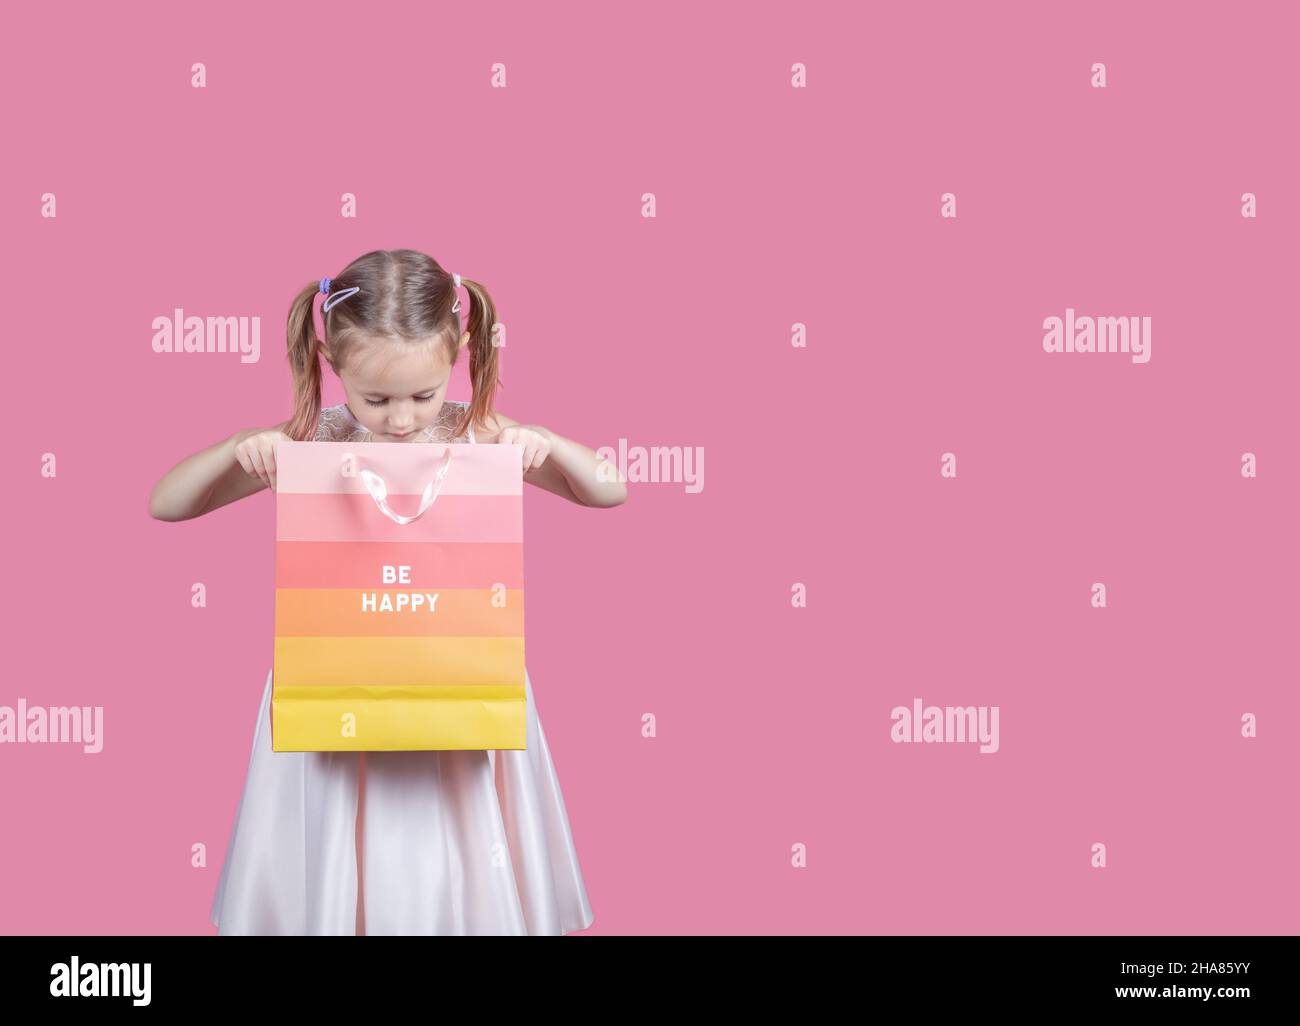 Portrait of an excited little girl wearing dress and holding colorful shopping bags isolated over pink background with copy space. Stock Photo